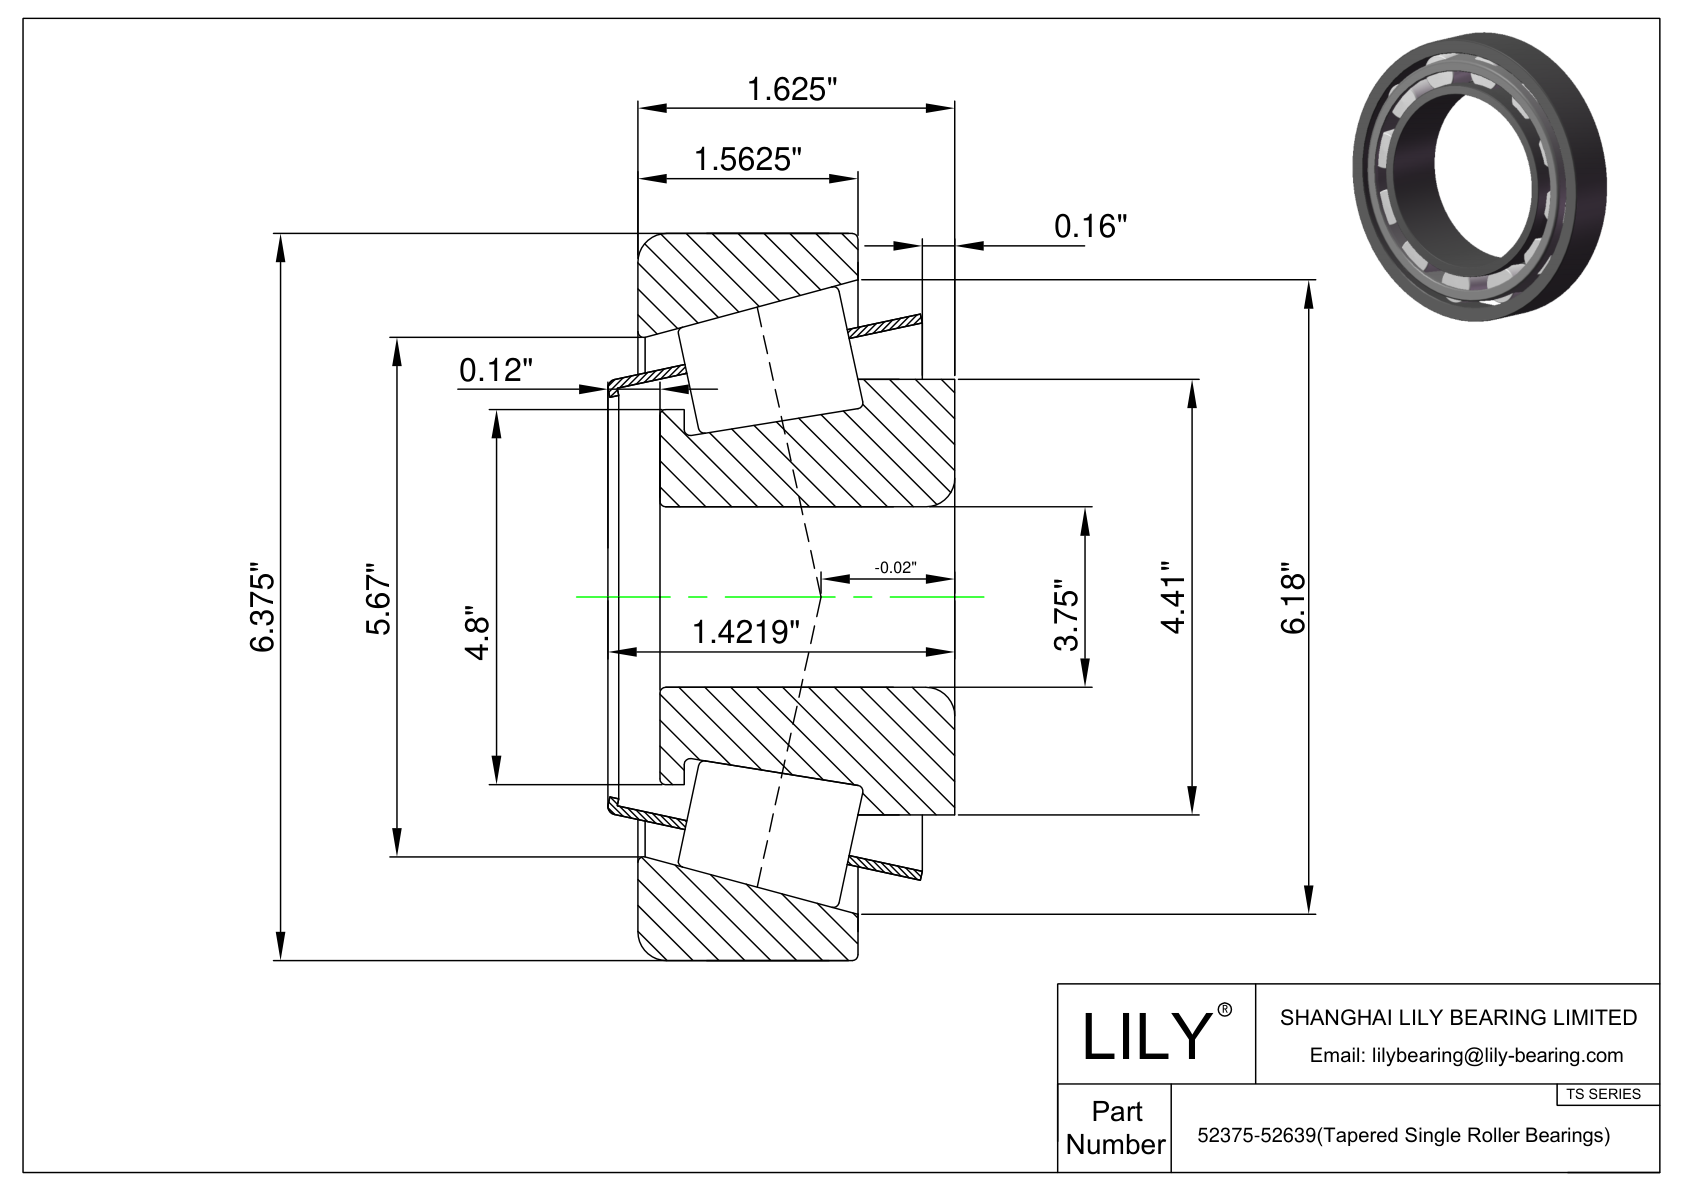 52375-52639 TS (Tapered Single Roller Bearings) (Imperial) cad drawing